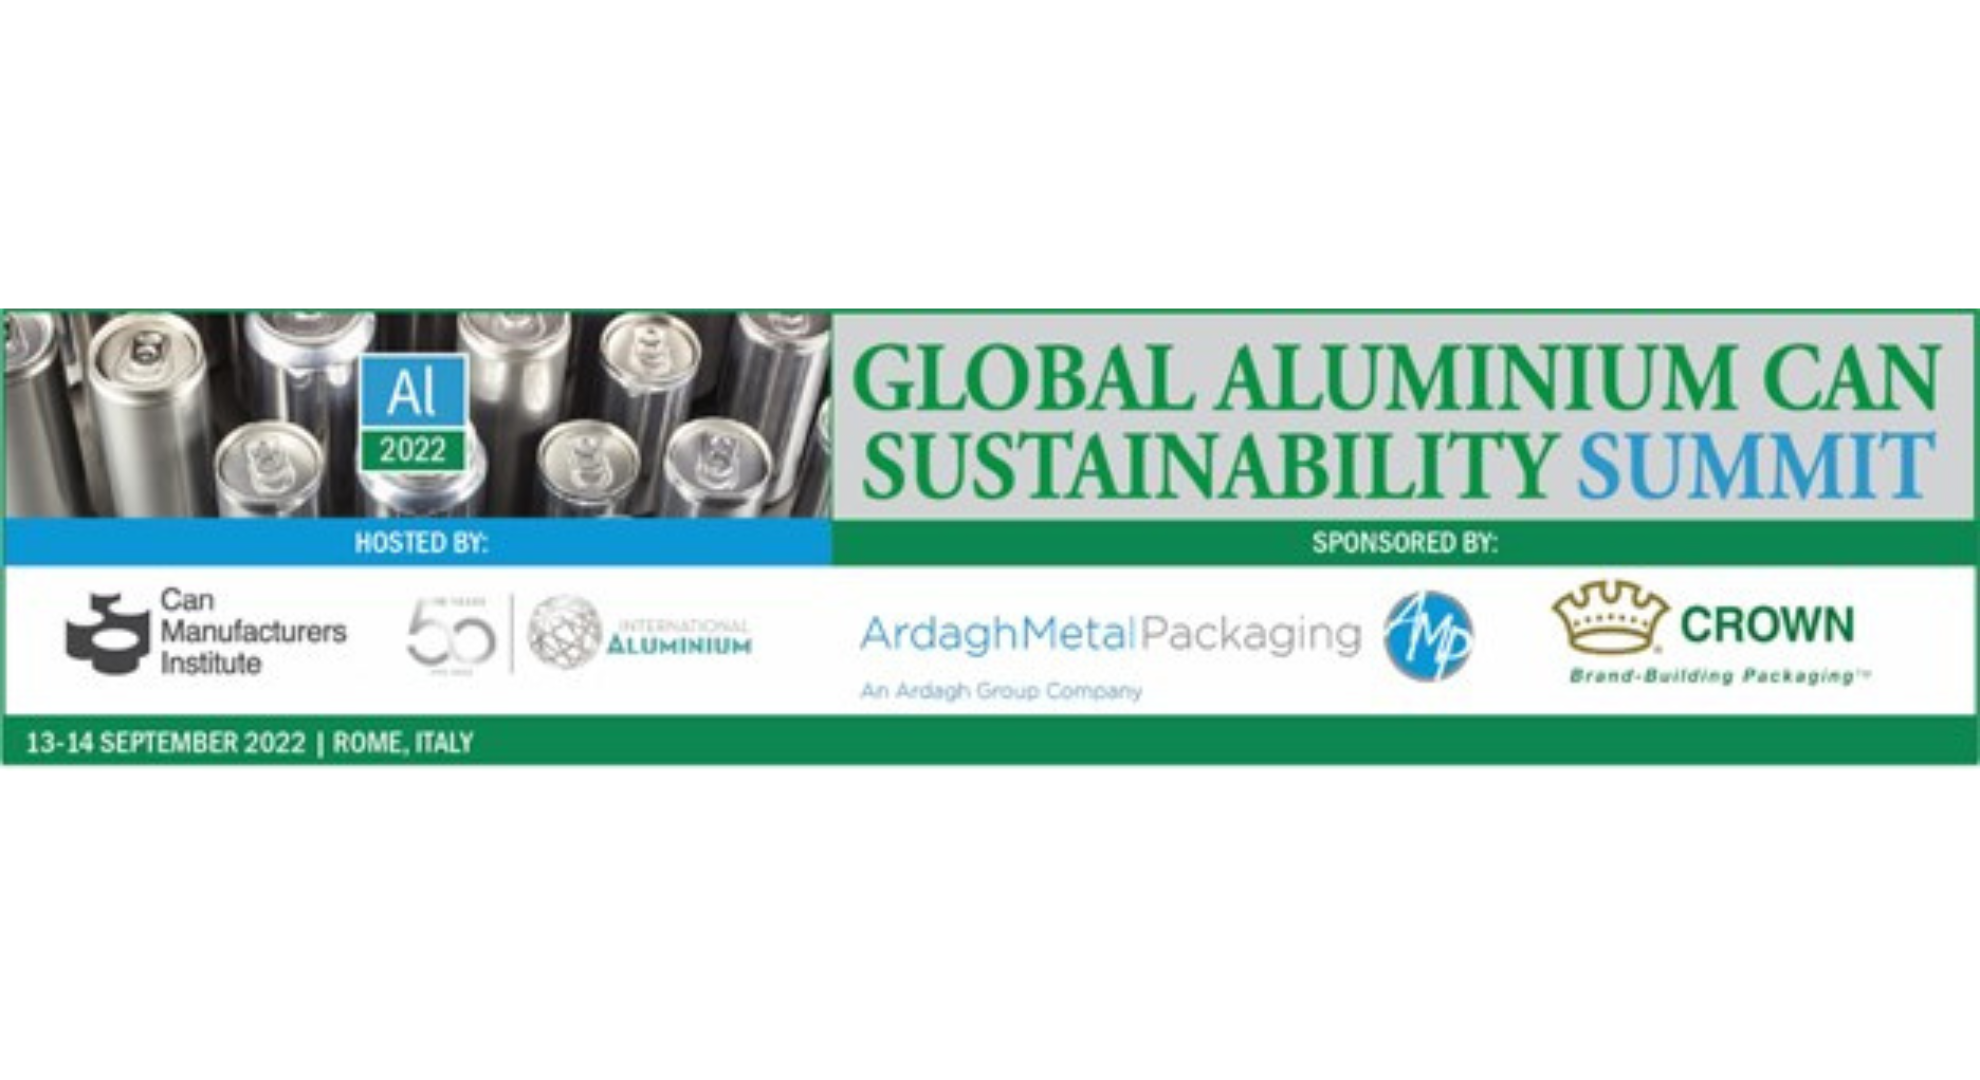 Global Aluminium Can Sustainability Summit on September 13-14, 2022 in Rome, Italy